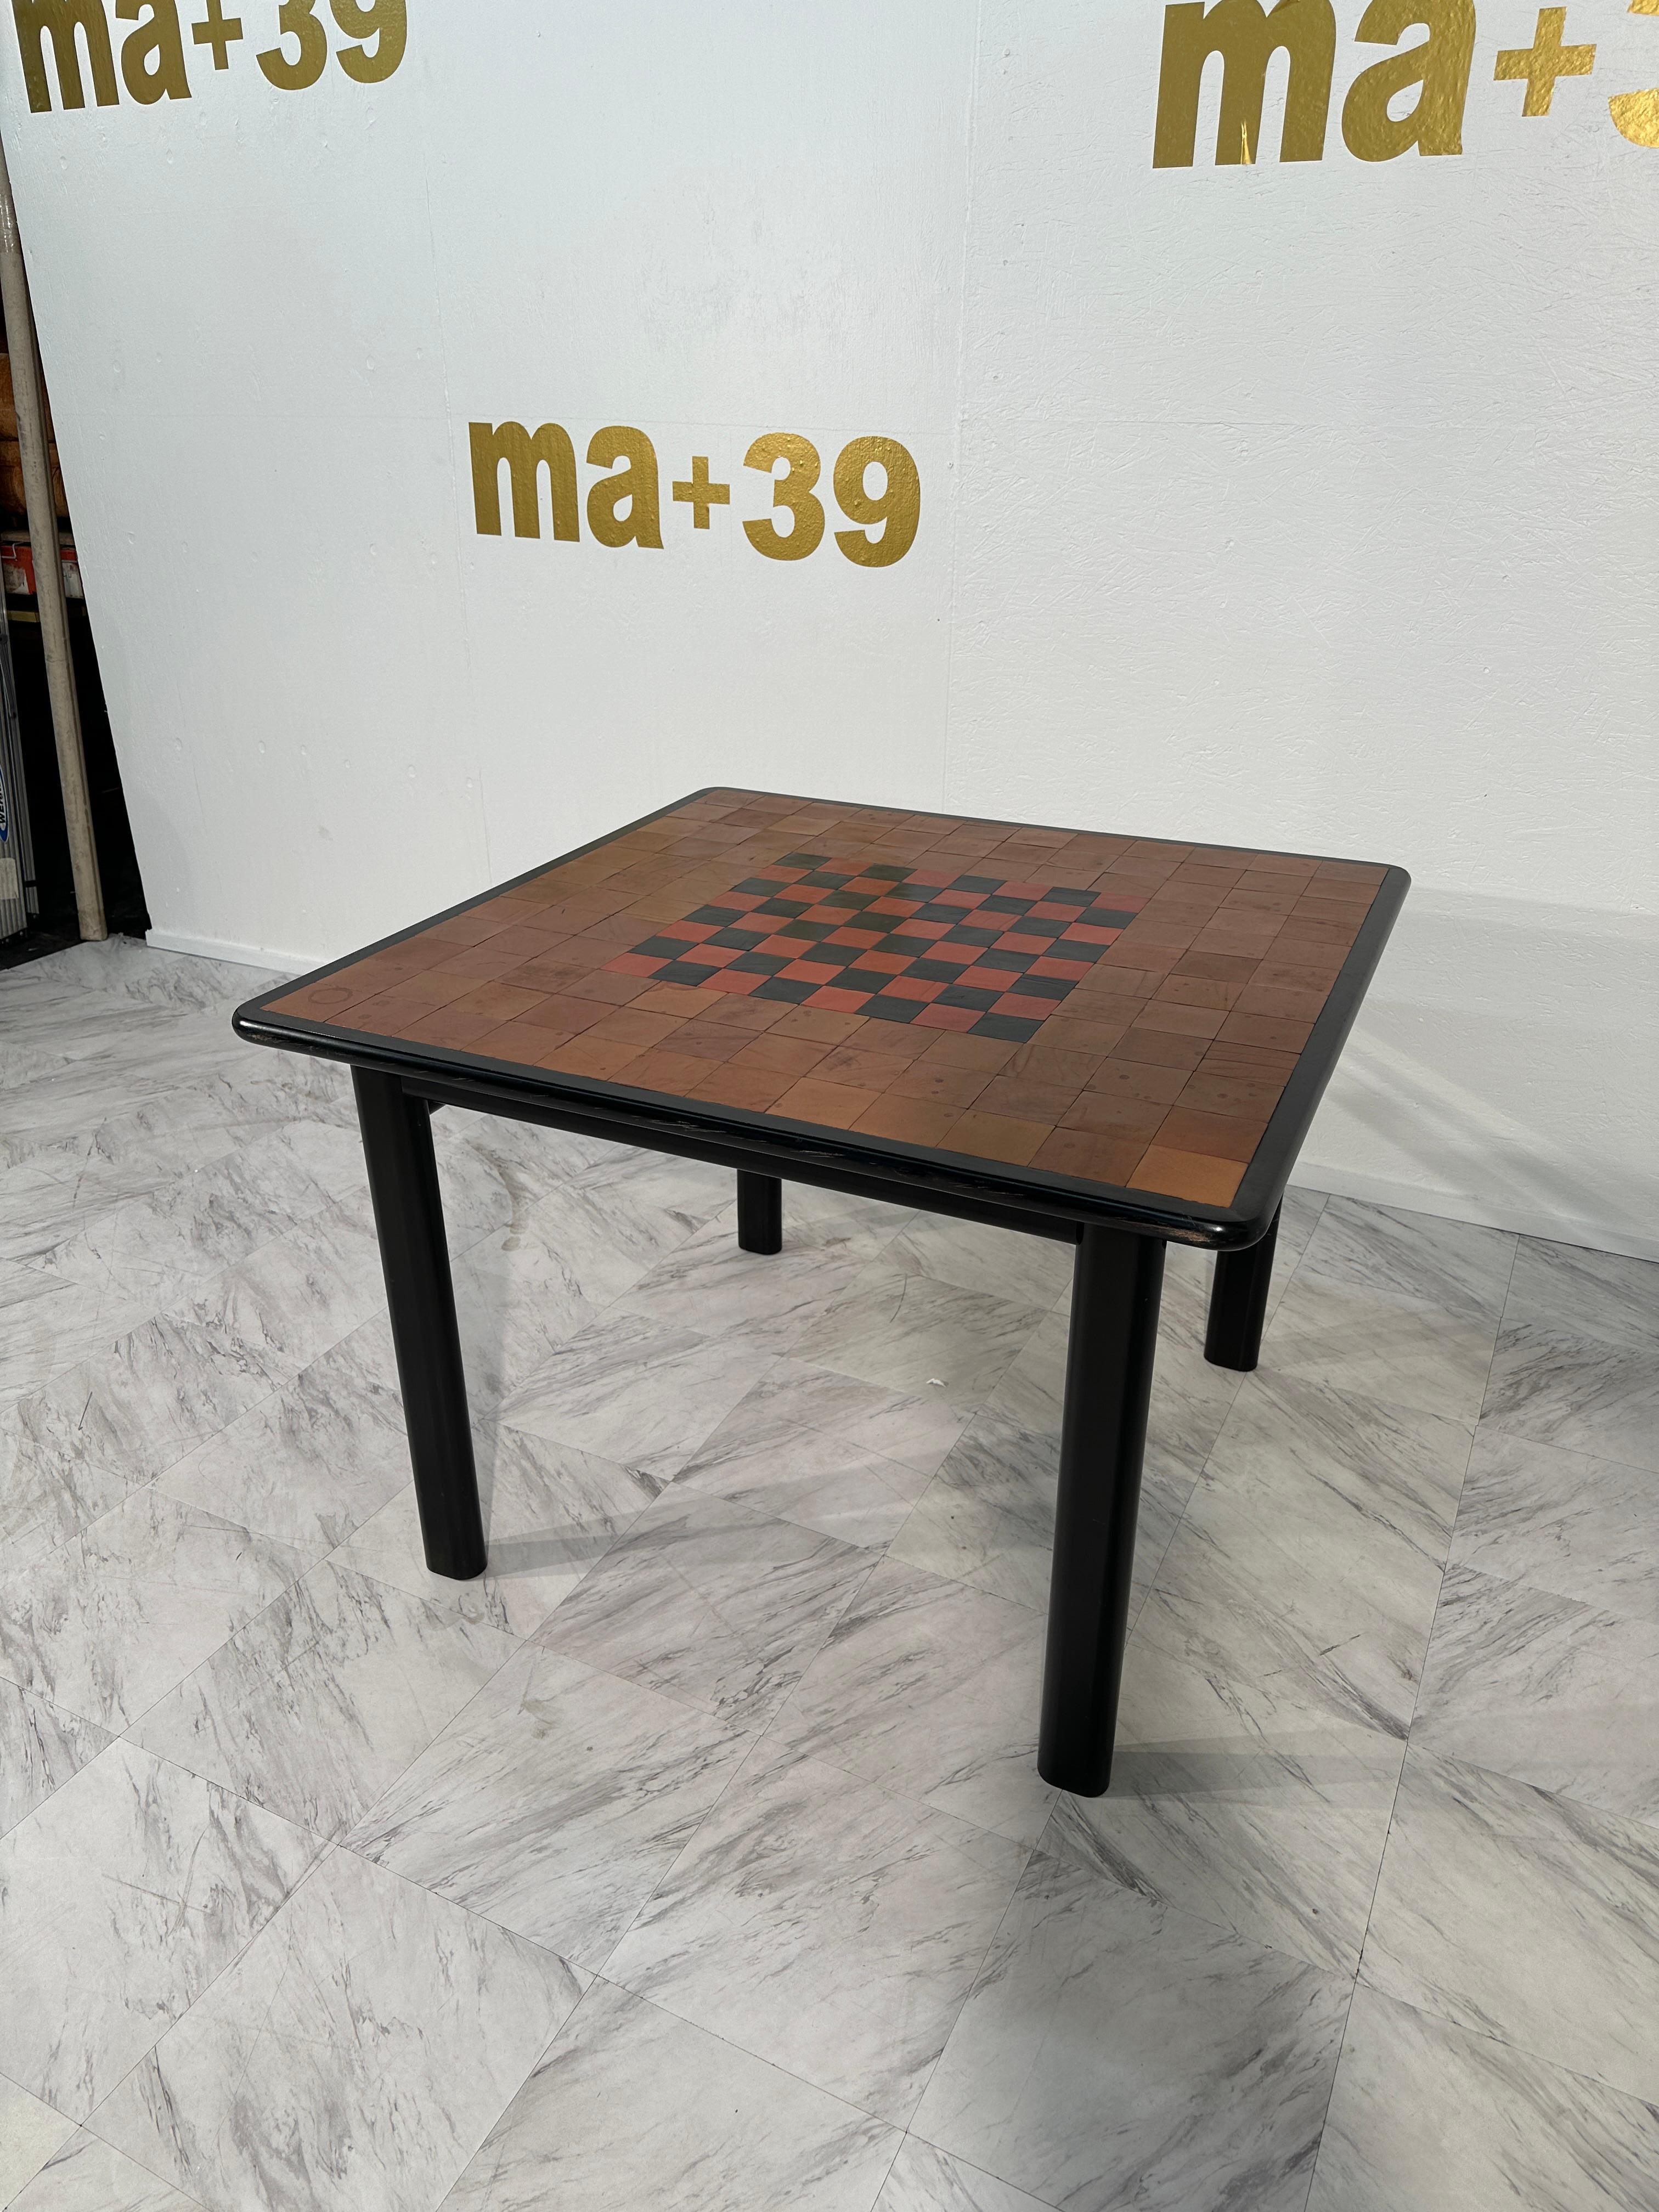 The Mid Century Italian Rosewood Game Table from the 1970s is a beautiful representation of Italian design from that era. Crafted with meticulous attention to detail, the table features a sleek rosewood construction that exudes warmth and